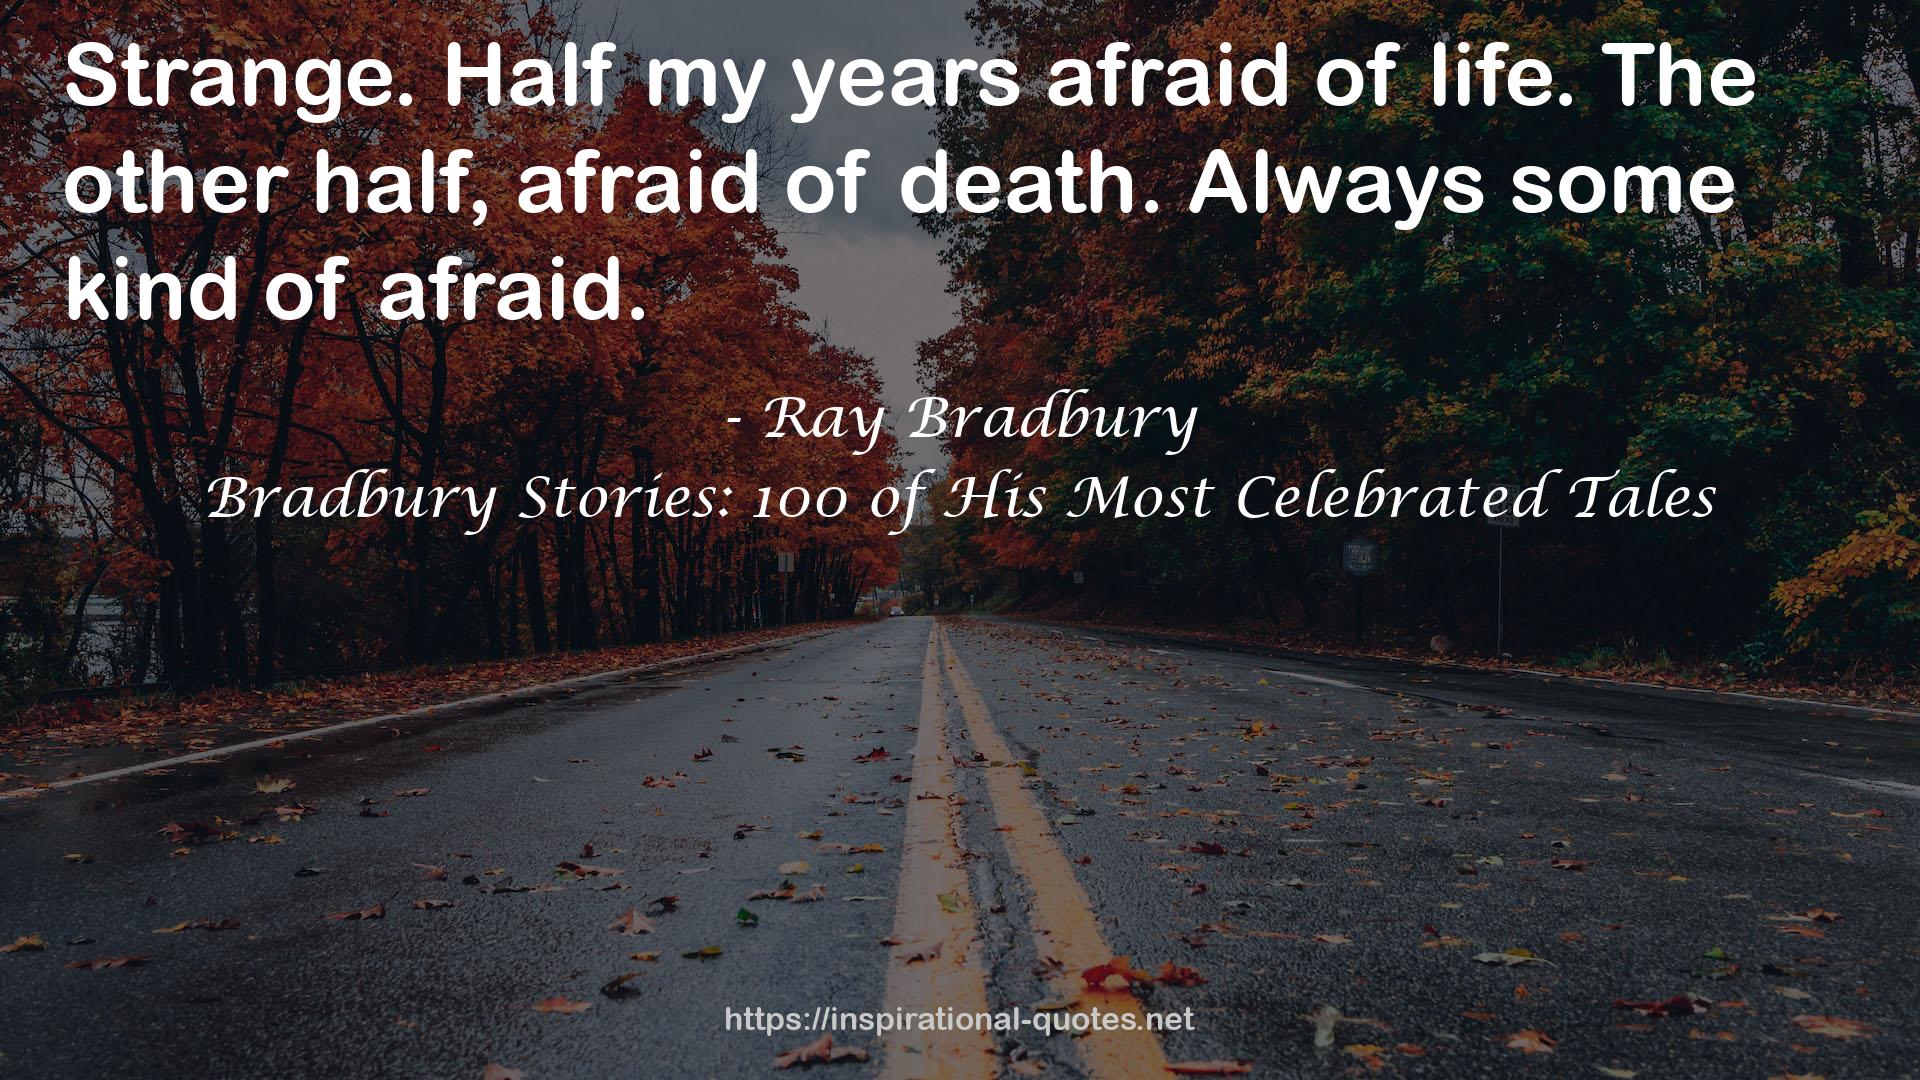 Bradbury Stories: 100 of His Most Celebrated Tales QUOTES